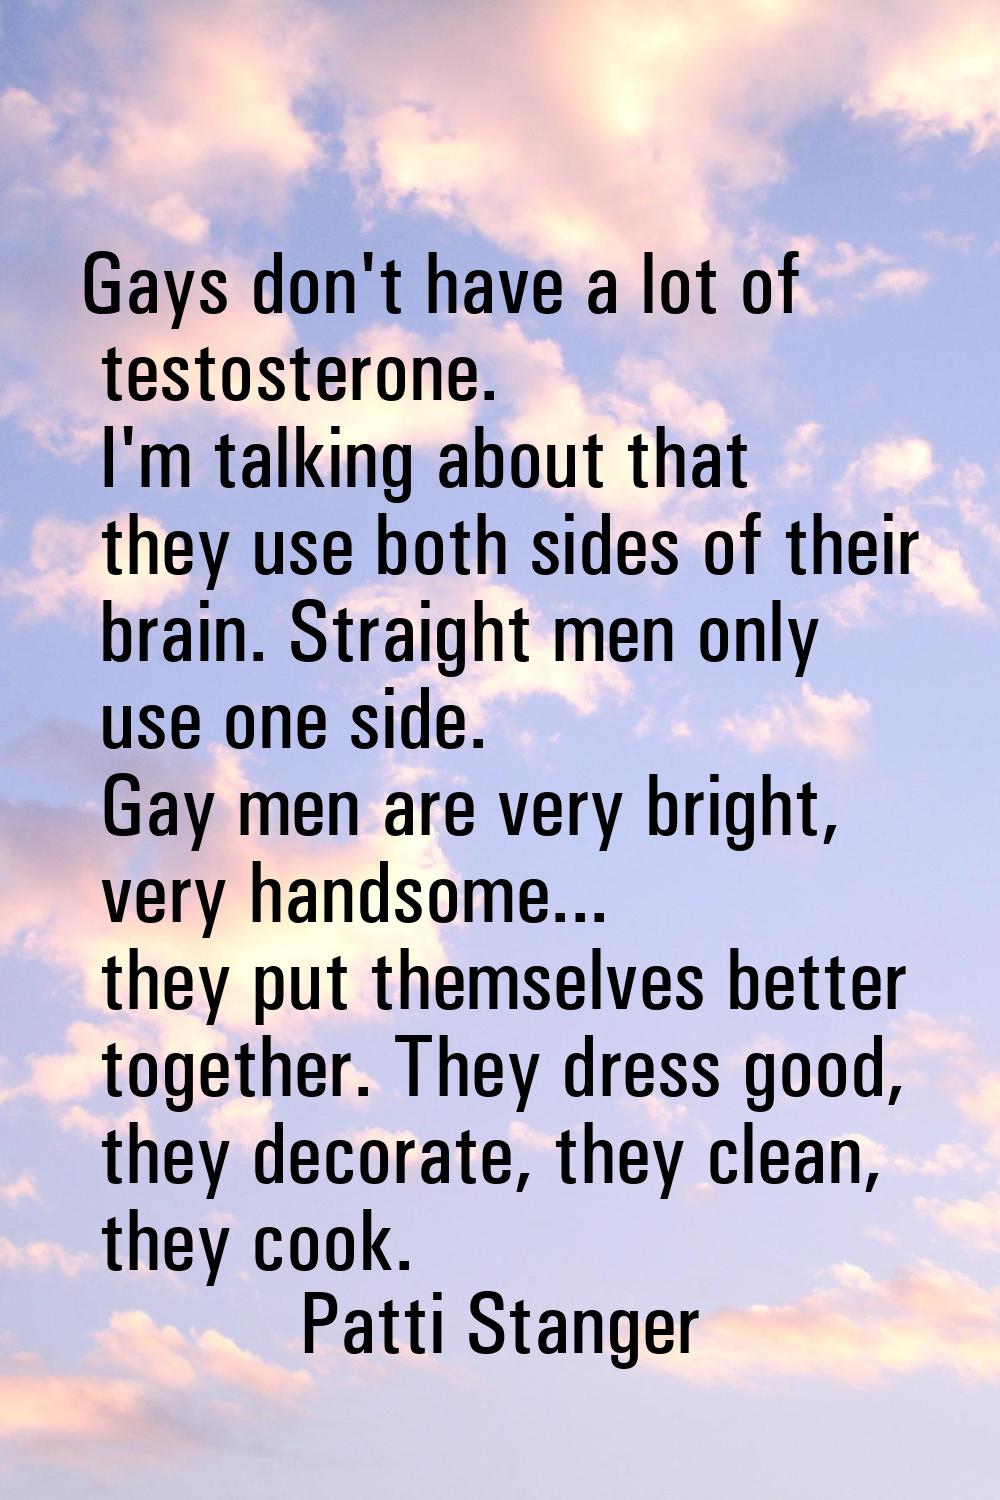 Gays don't have a lot of testosterone. I'm talking about that they use both sides of their brain. S